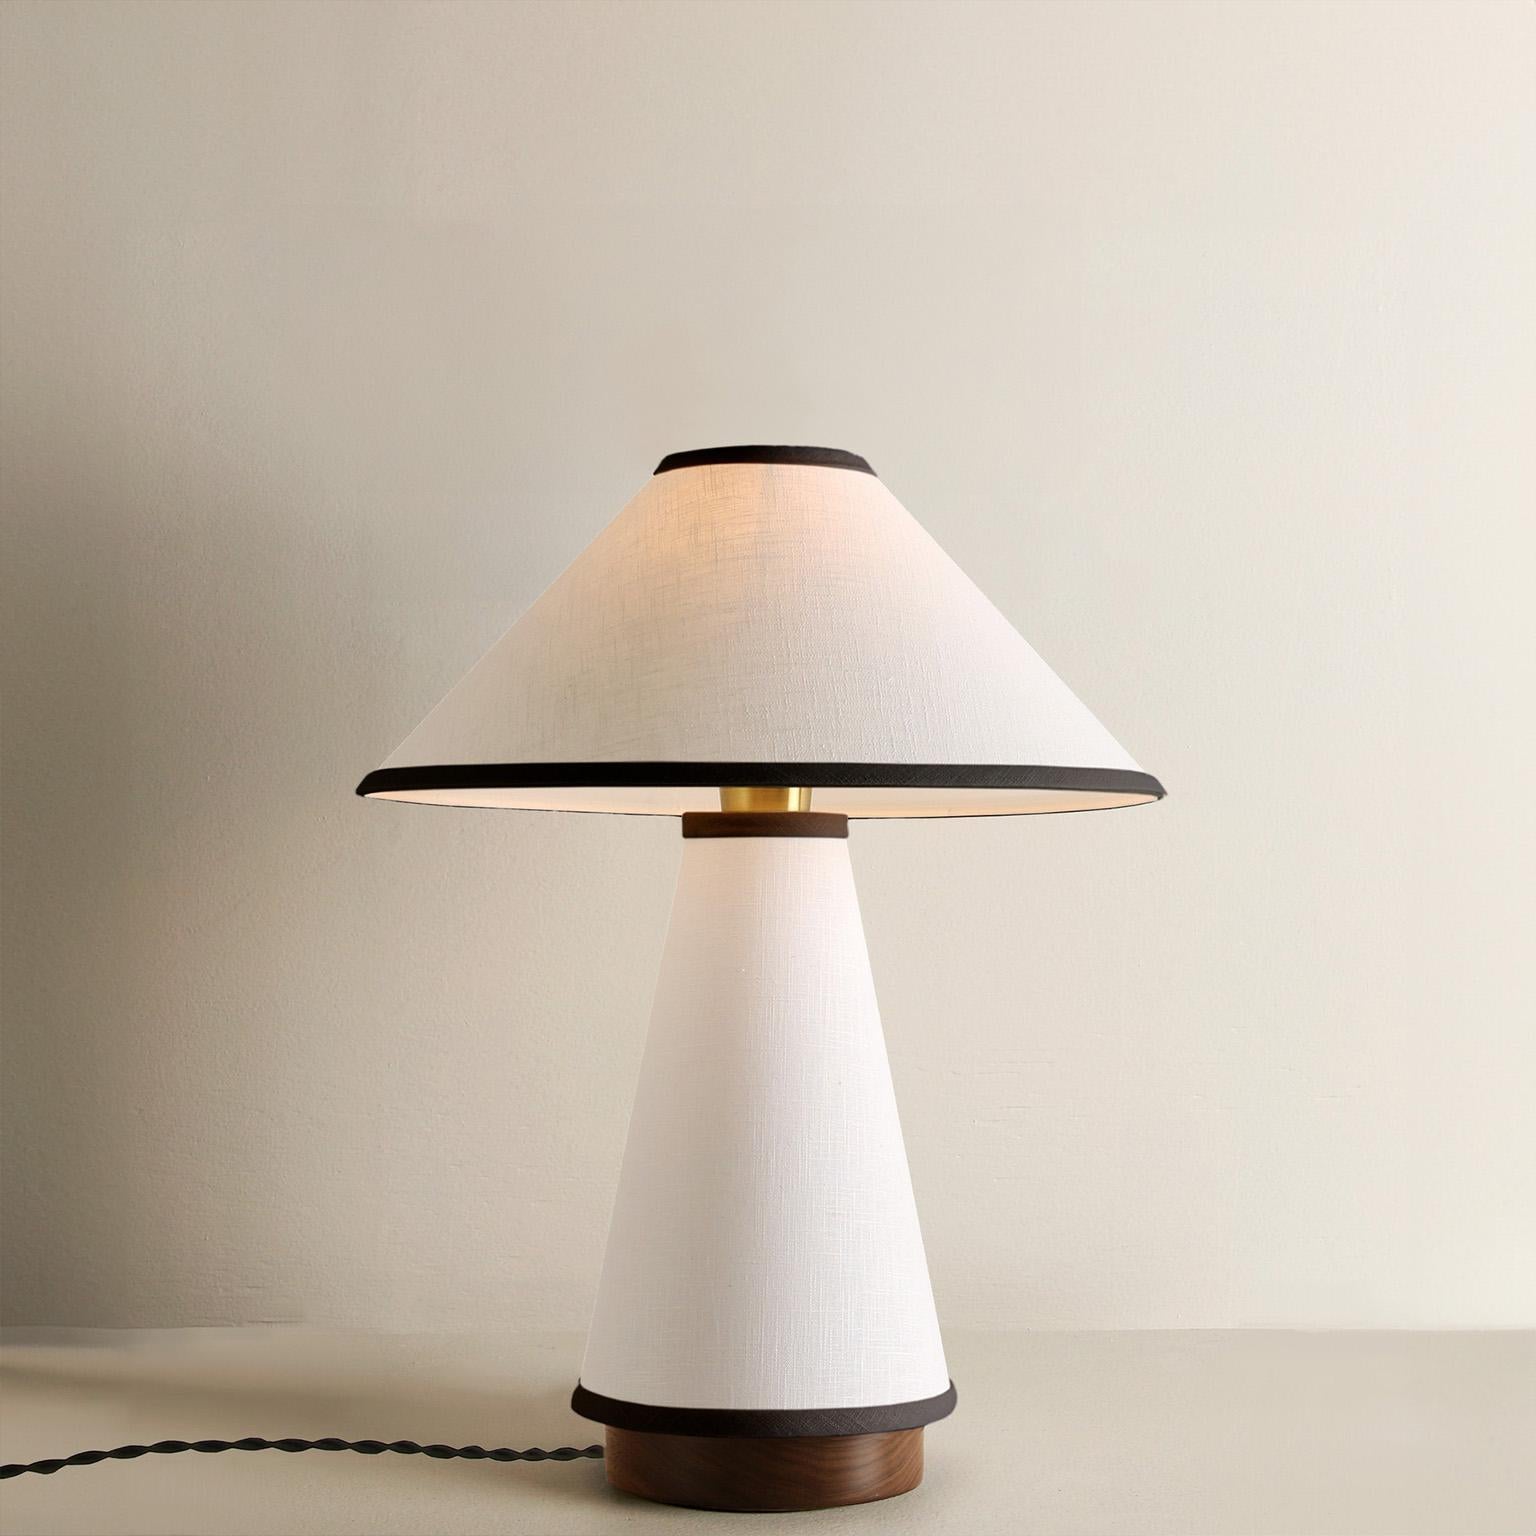 American Linden Table Lamp Short, with Cream Linen and Black Trim by Studio DUNN For Sale